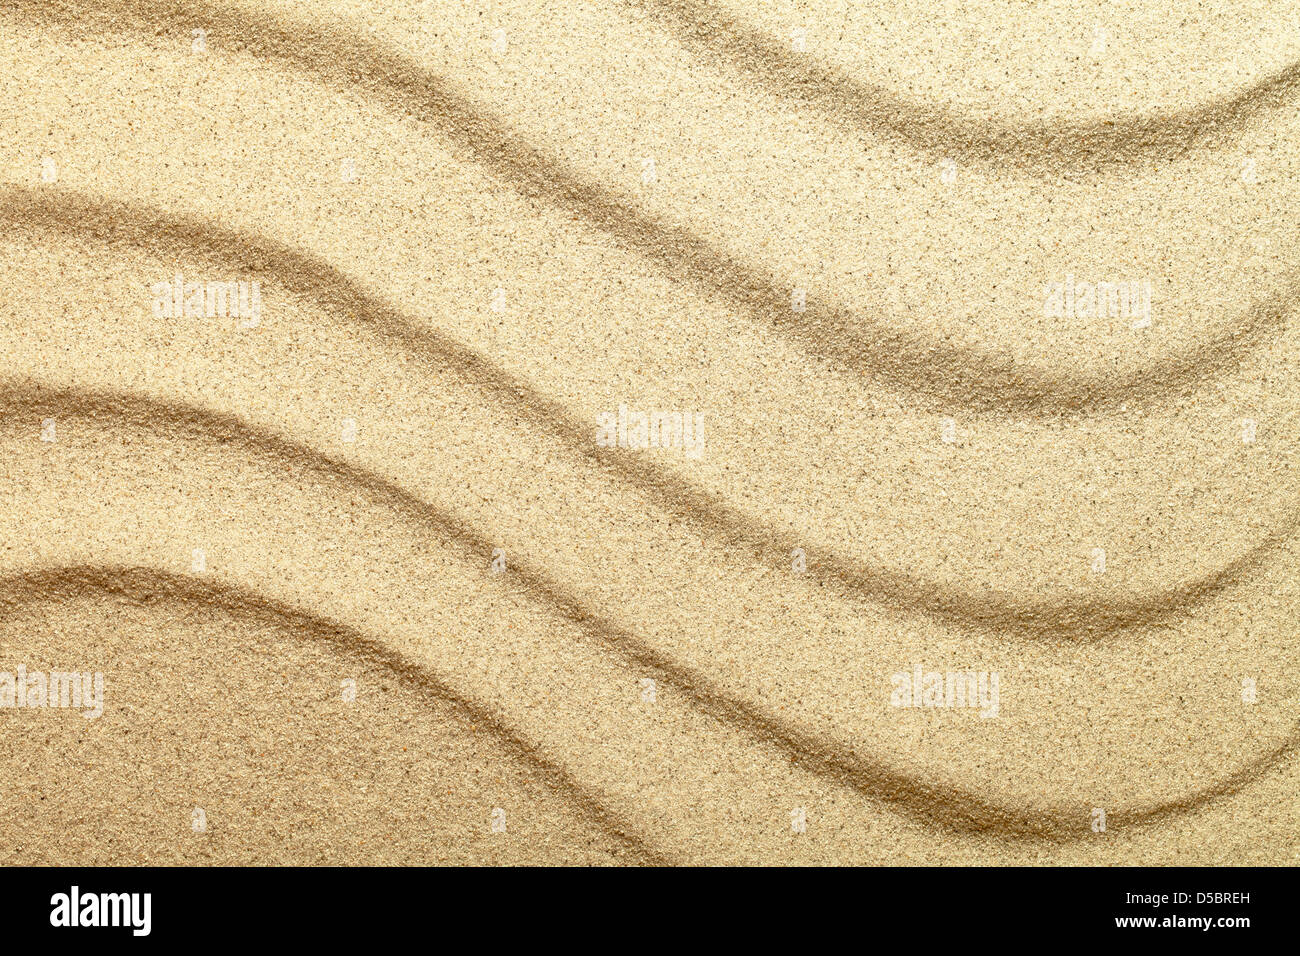 Sand background. Sandy beach texture. Top view Stock Photo